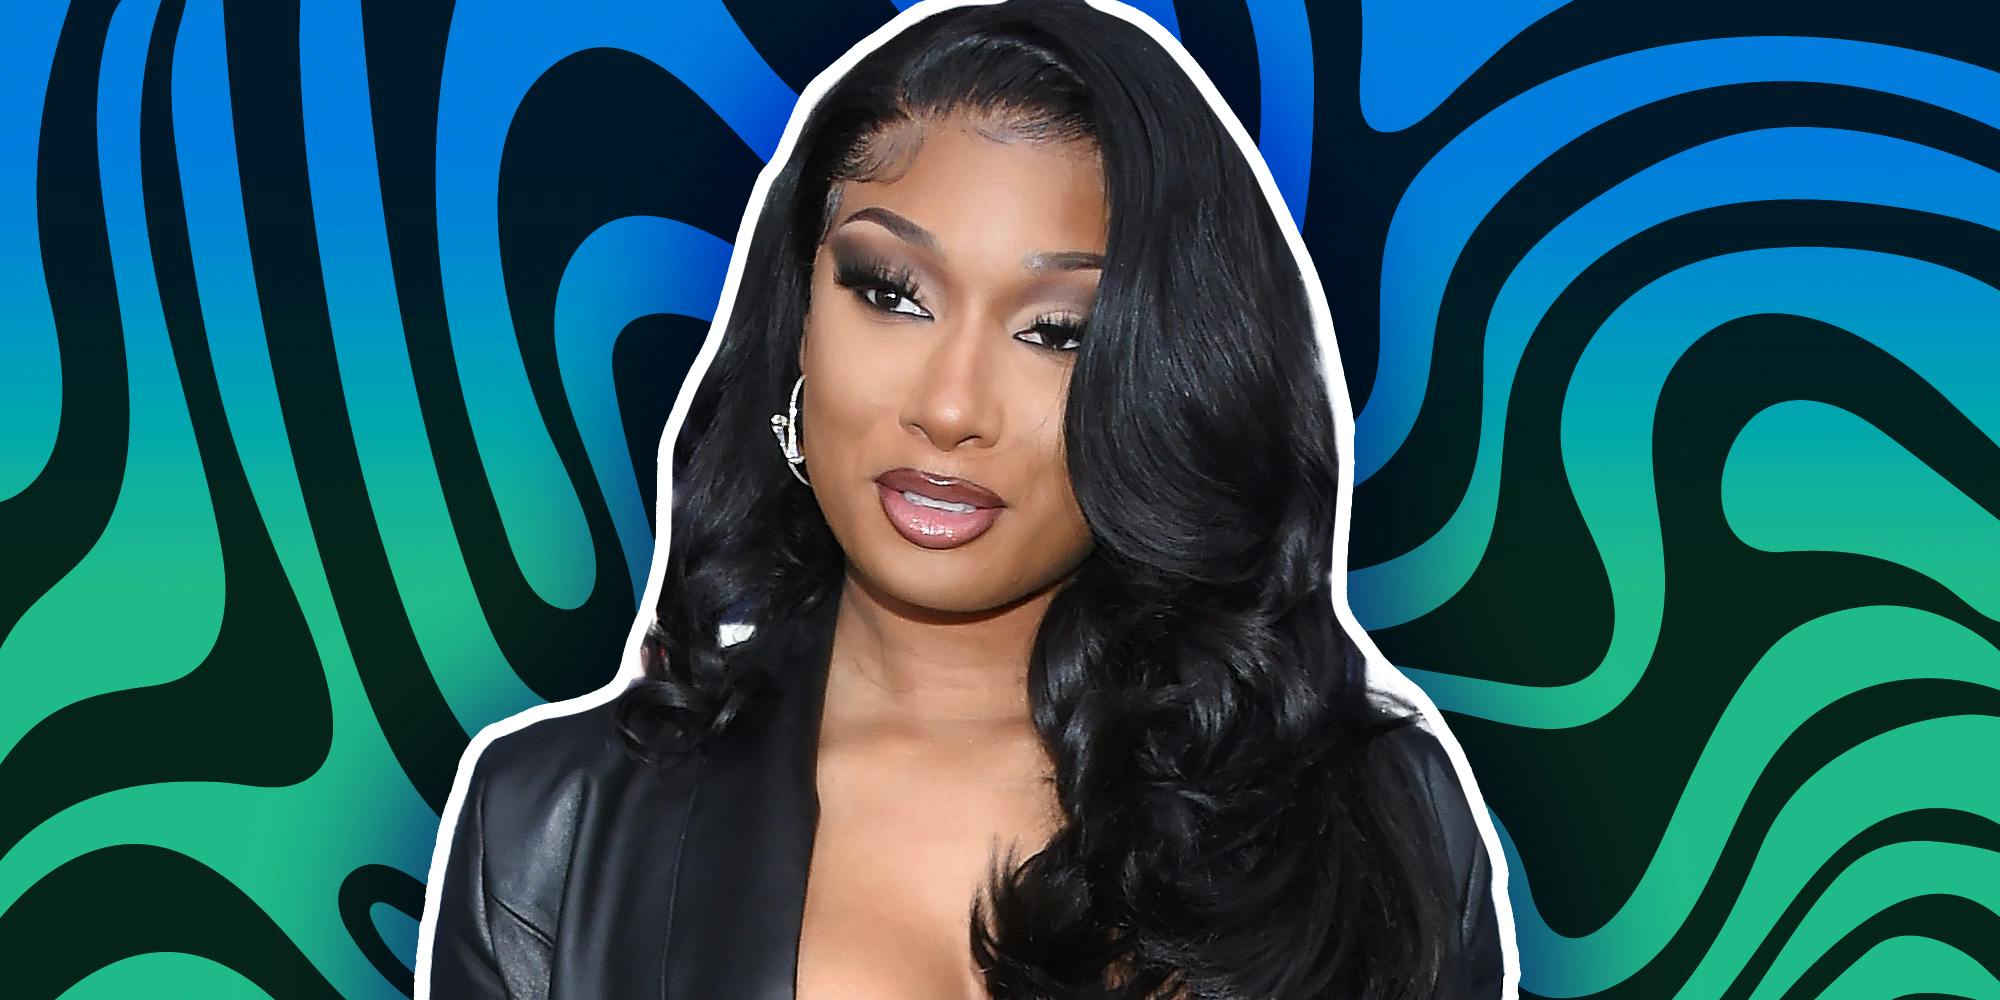 Fans feel seen by new anime-inspired Megan Thee Stallion song